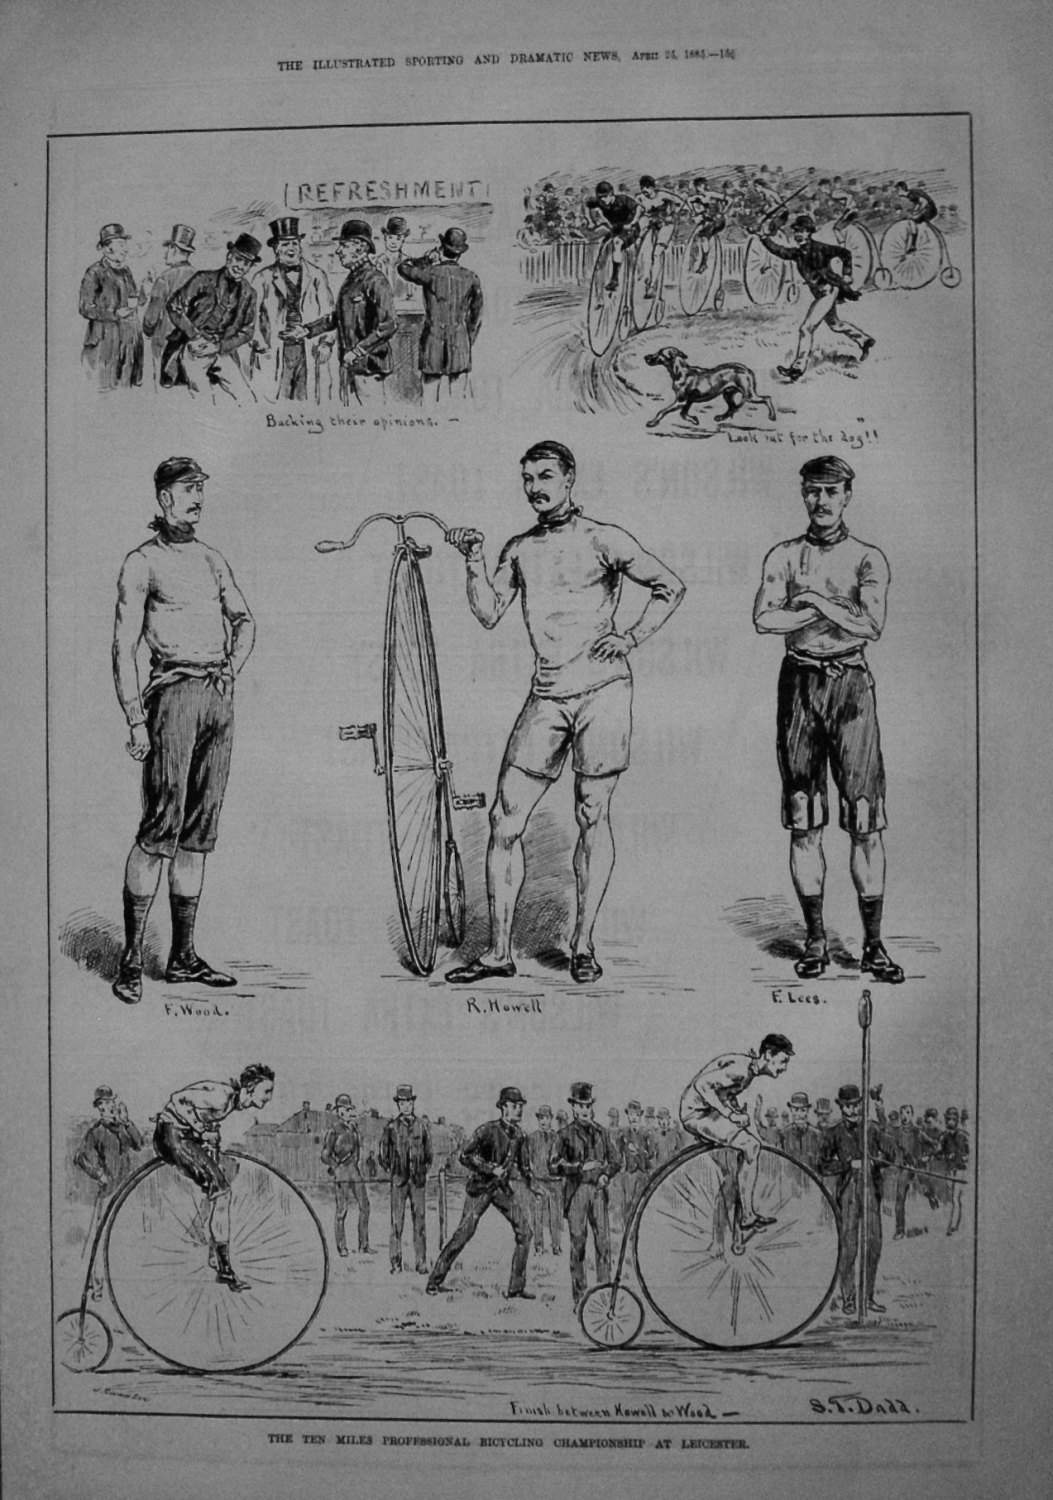 Ten Miles Professional Bicycling Championship at Leicester. 1885.